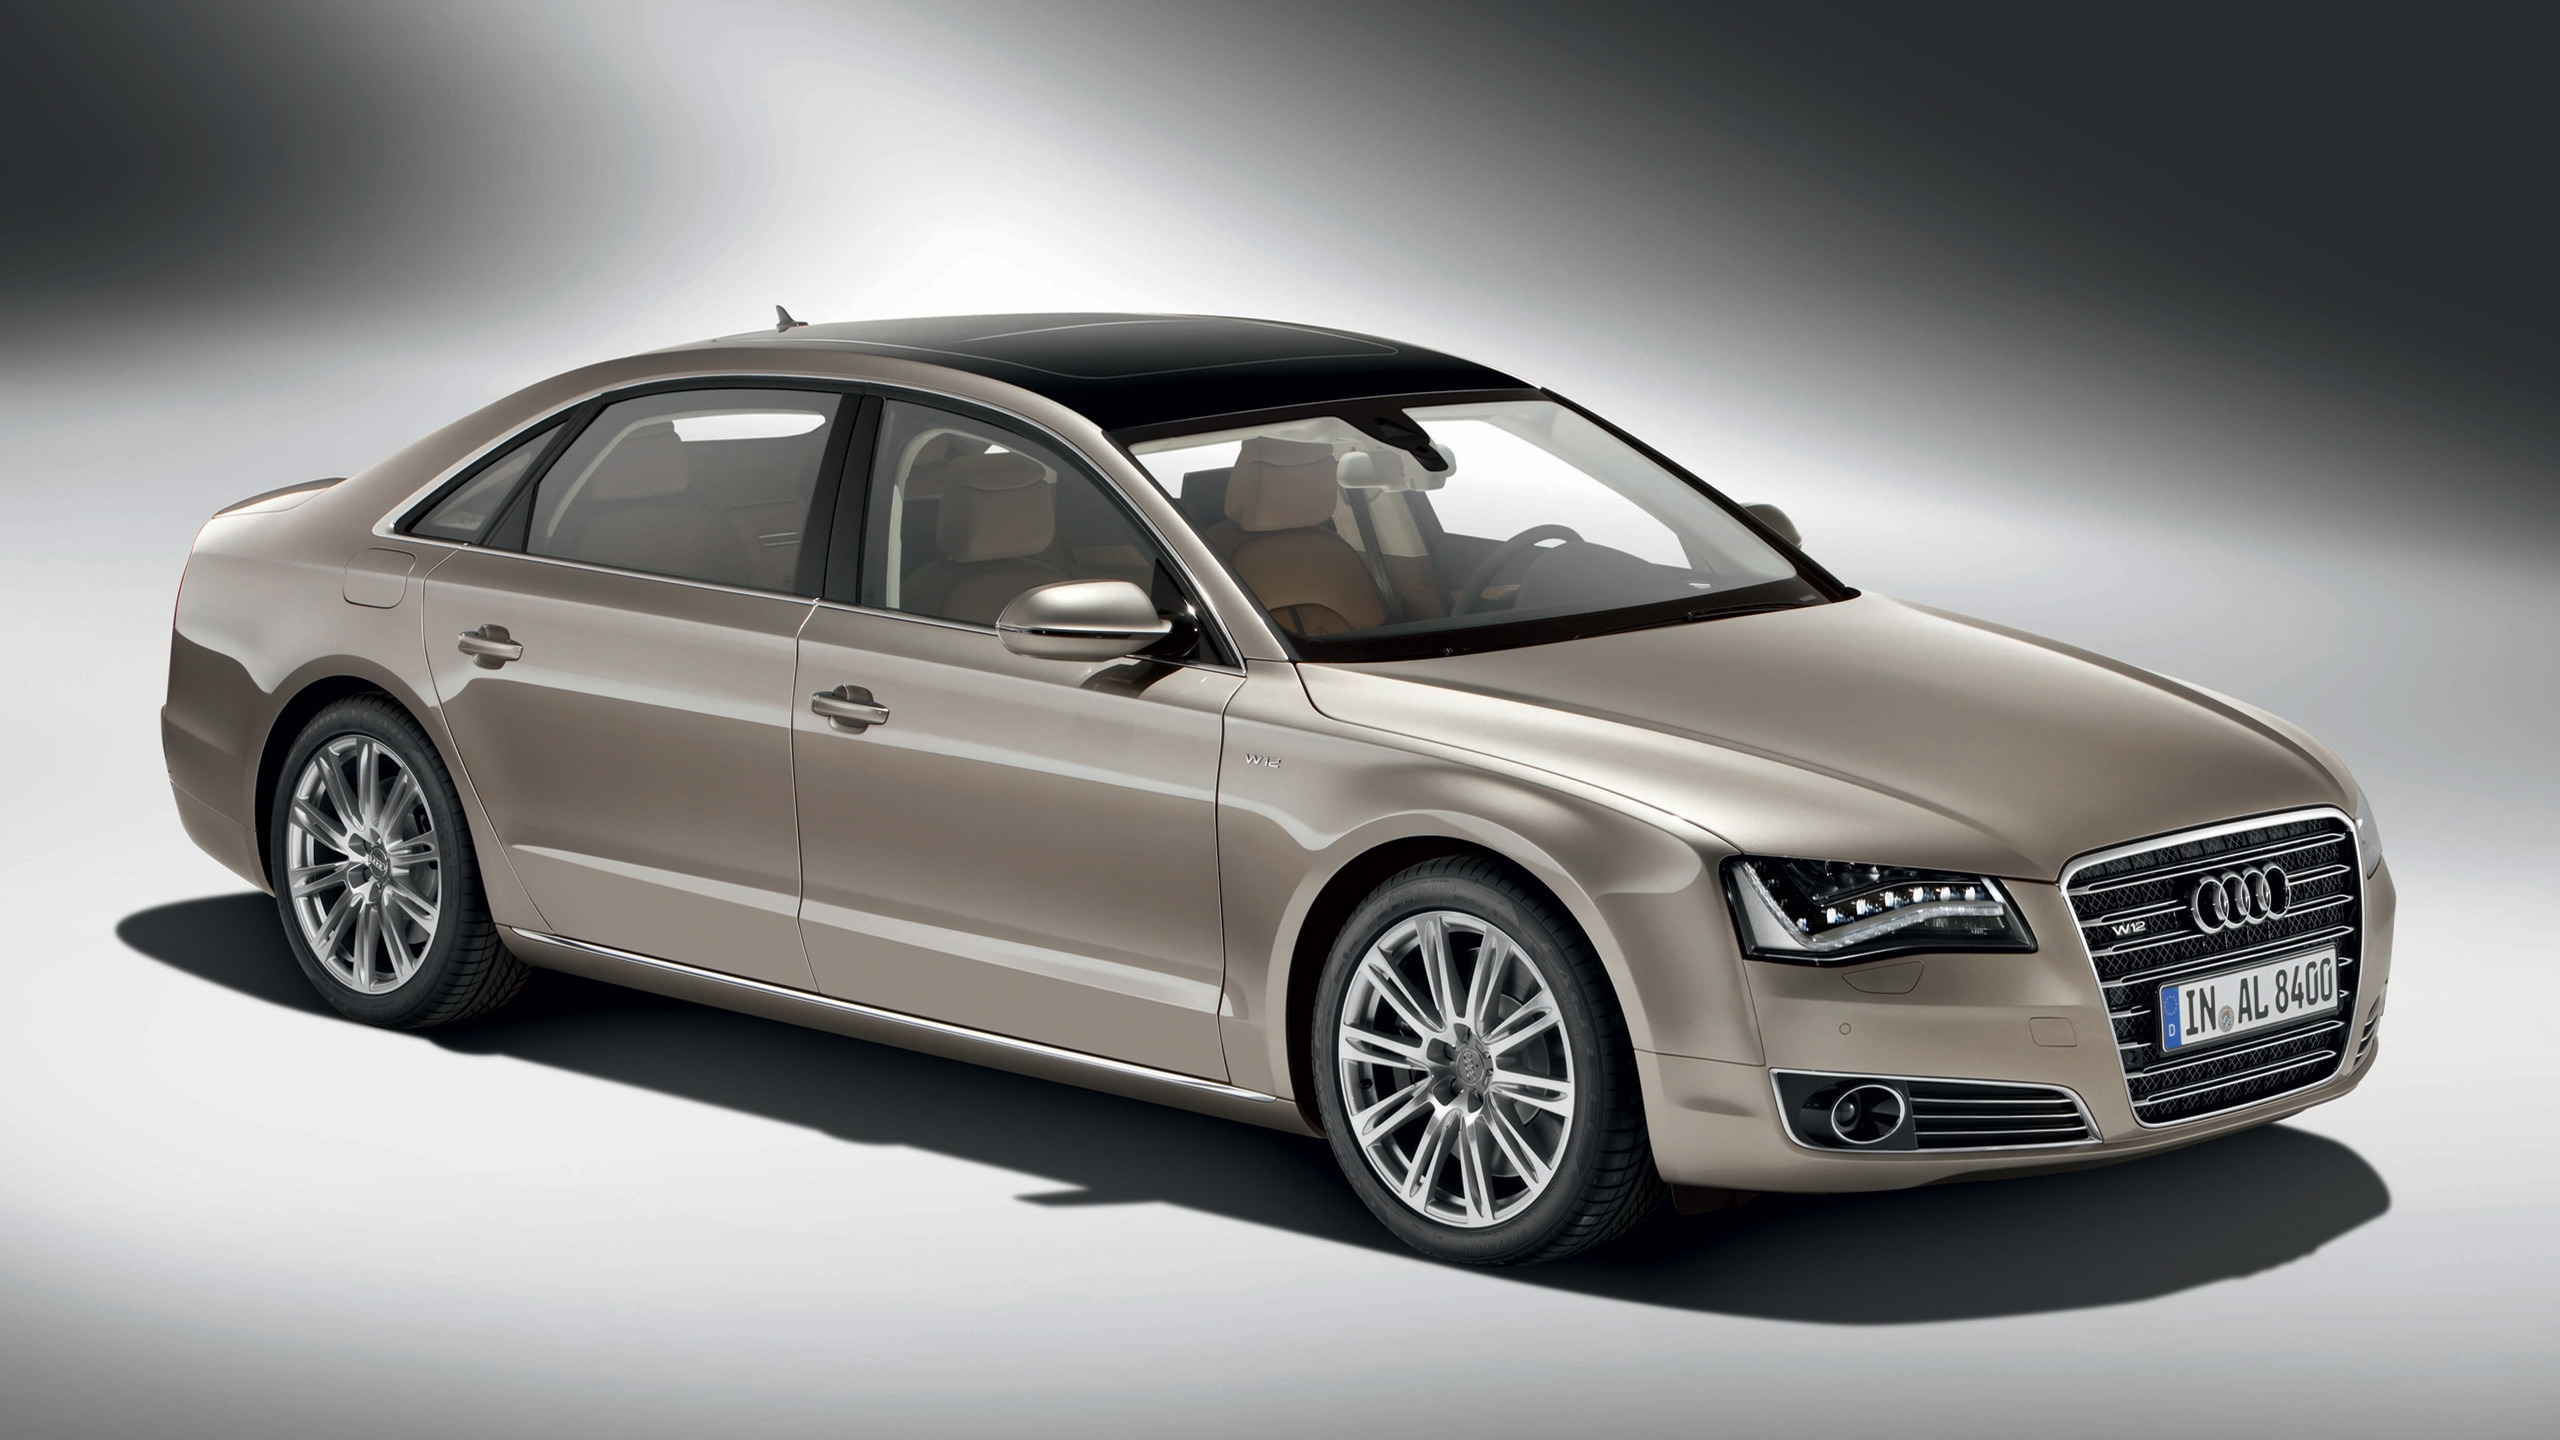 Audi A8 W12 2011 for 2560x1440 HDTV resolution